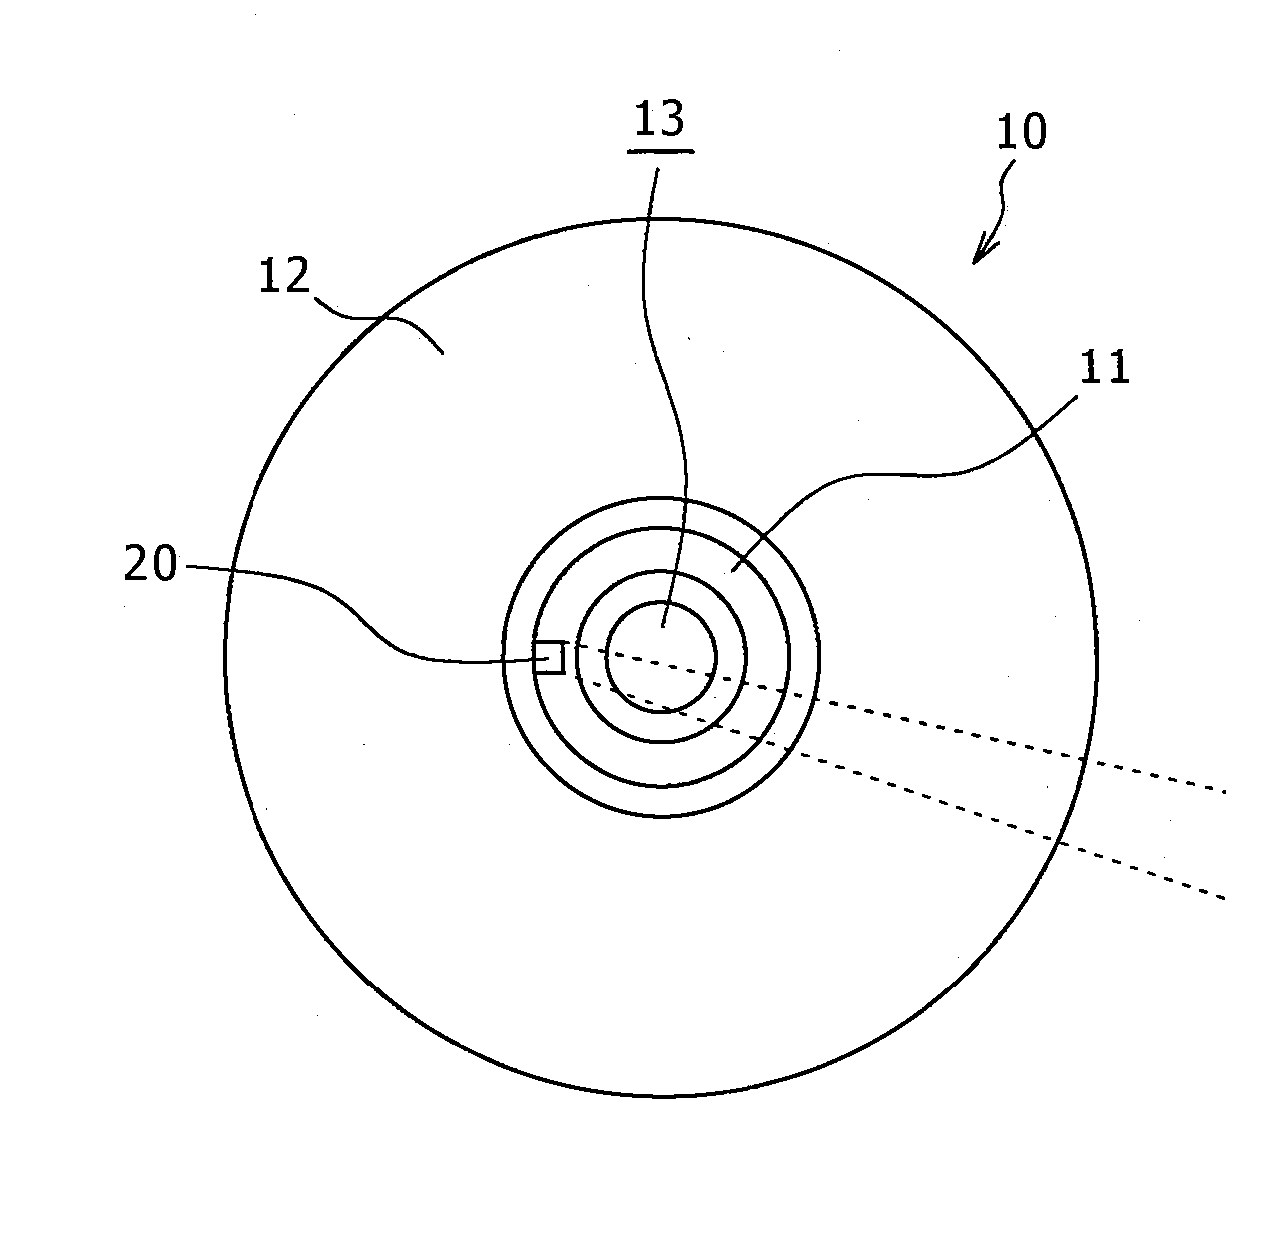 Mold body and method of manufacturing the same